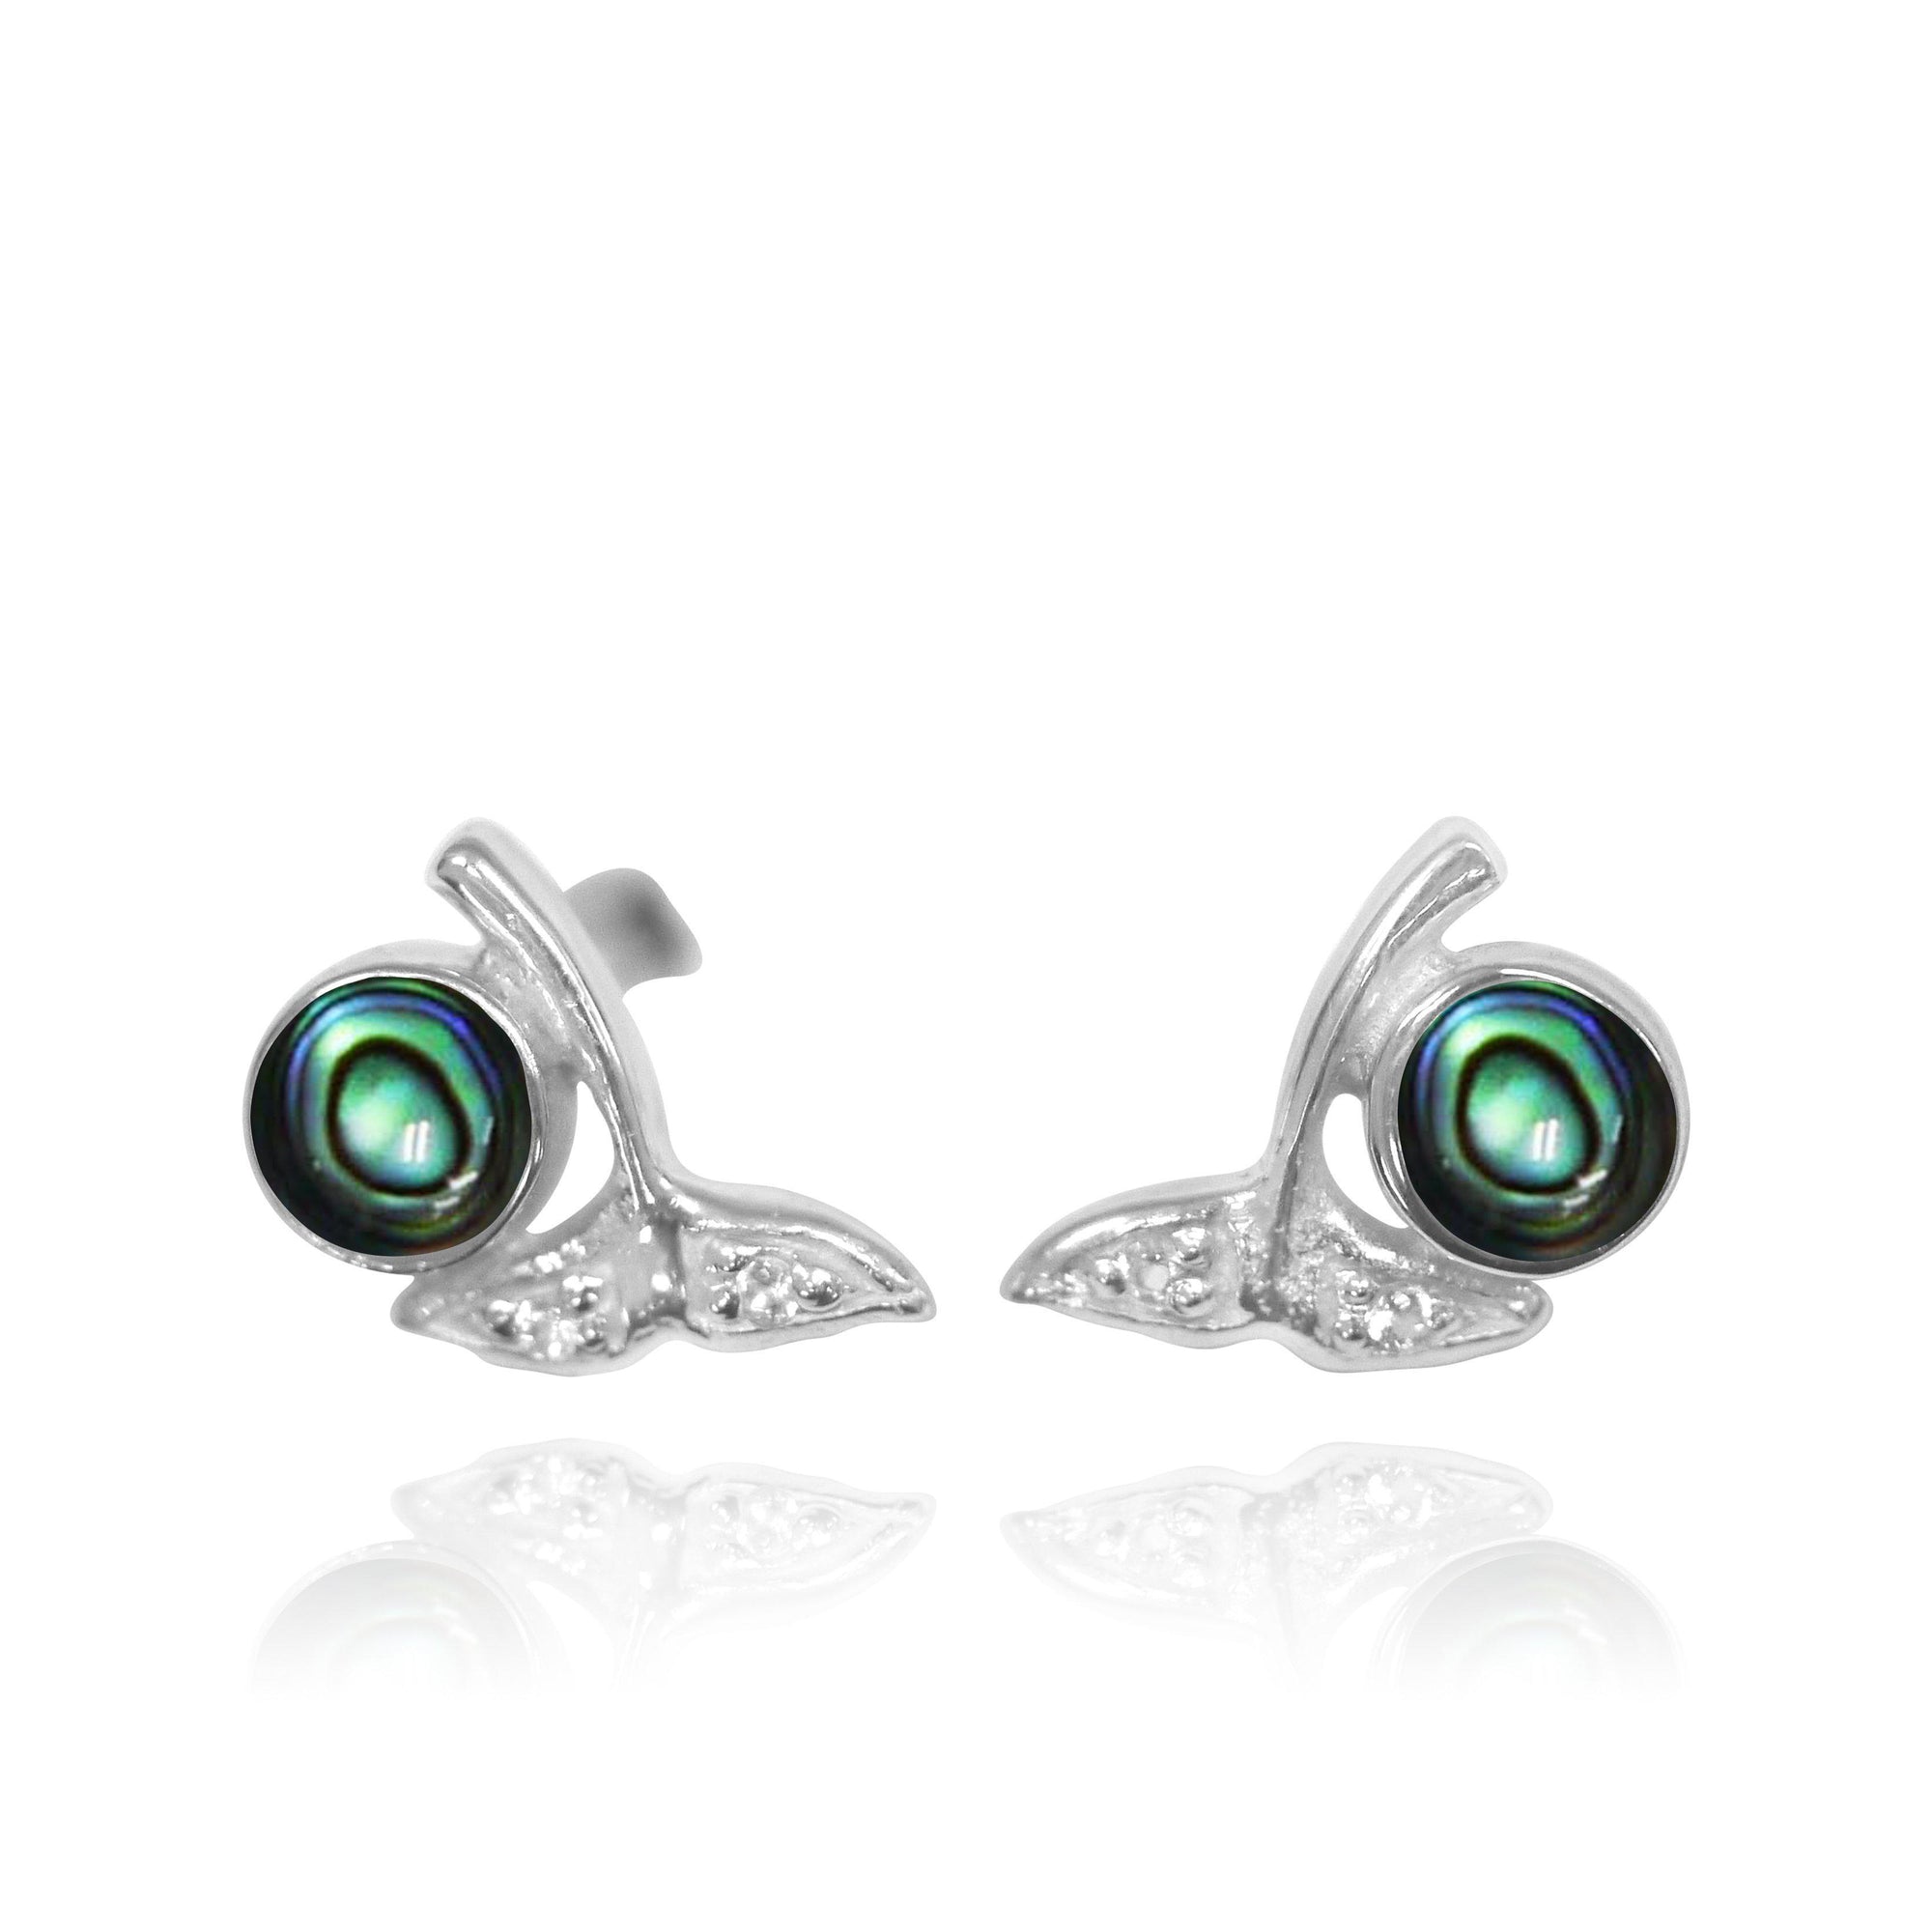 Sterling Silver Whale Tail Earrings with Round Abalone Shell and White Topaz